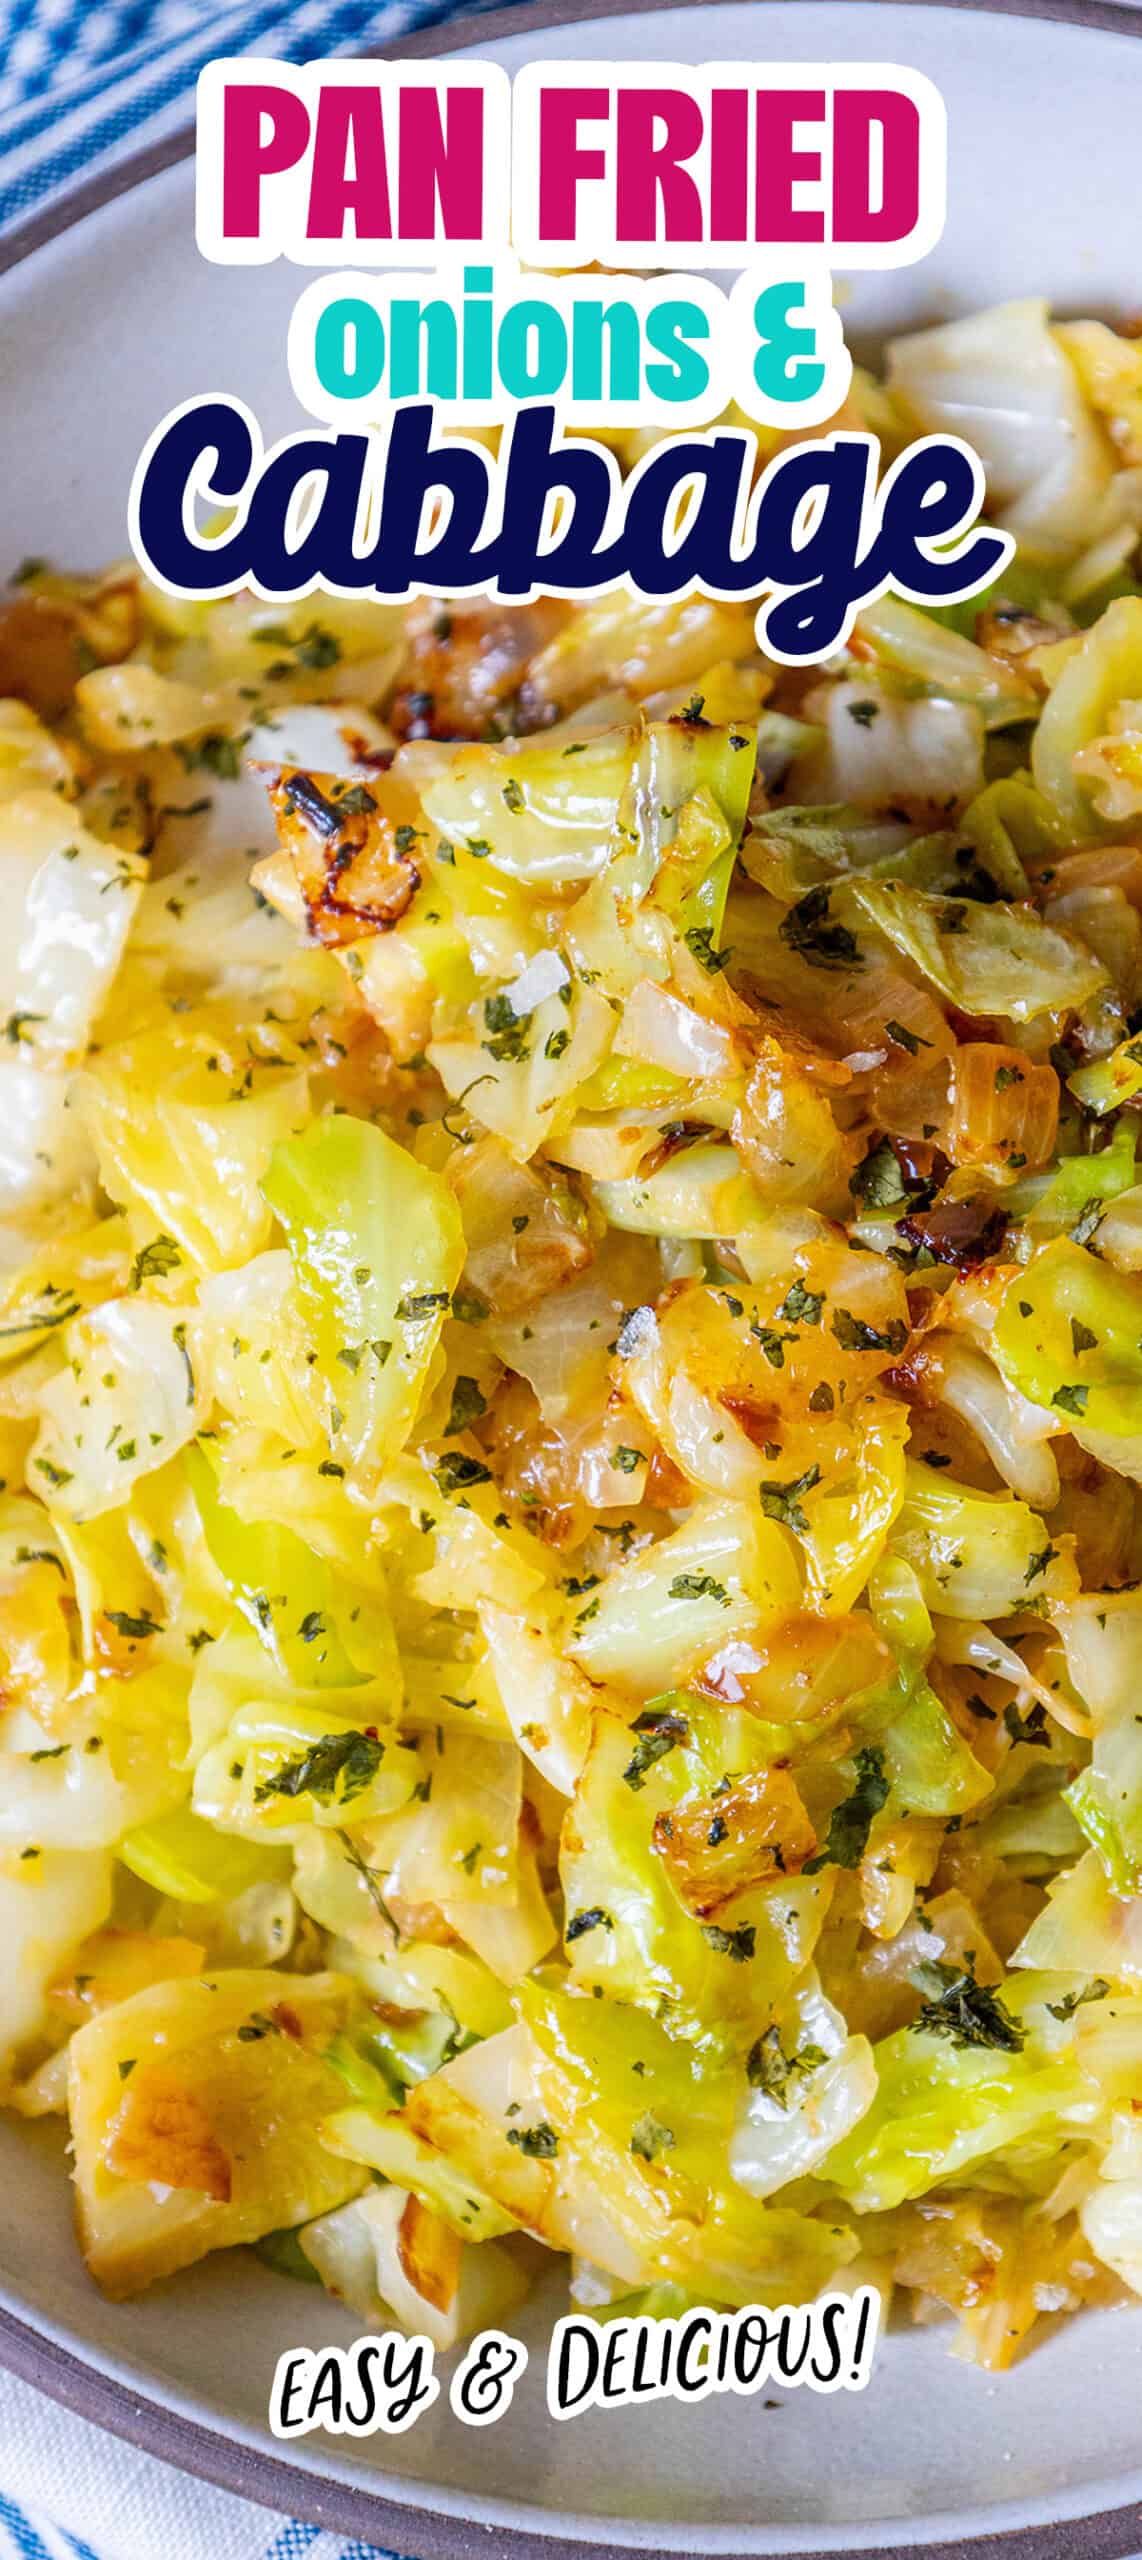 Easy keto cabbage and onions recipe cooked to perfection with a delicious caramelized flavor.